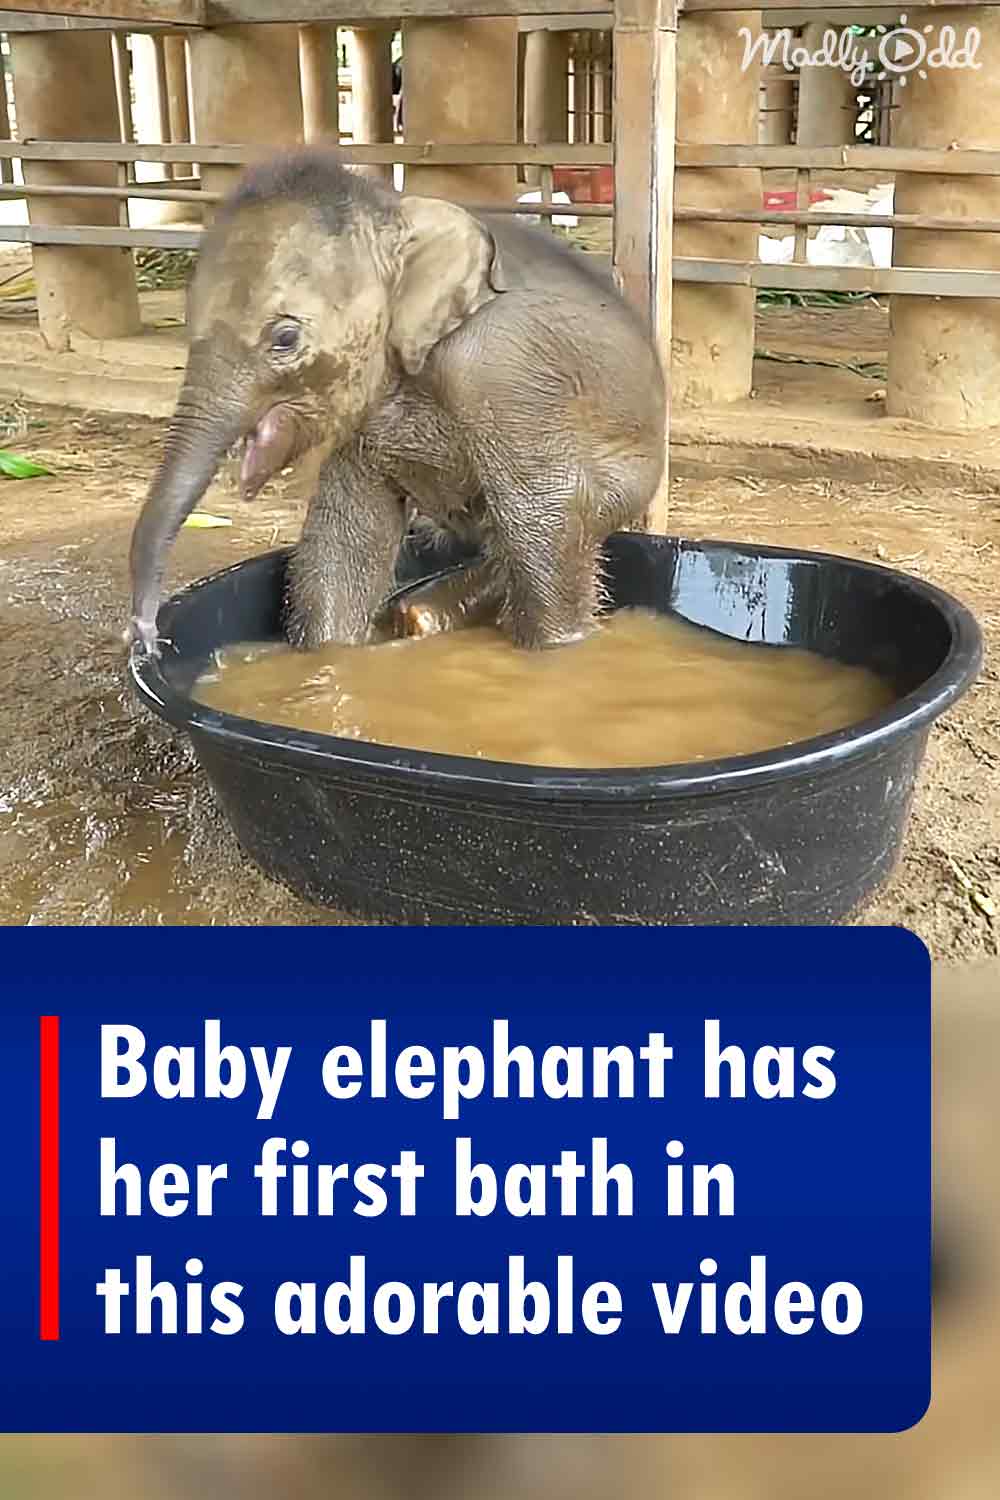 Baby elephant has her first bath in this adorable video